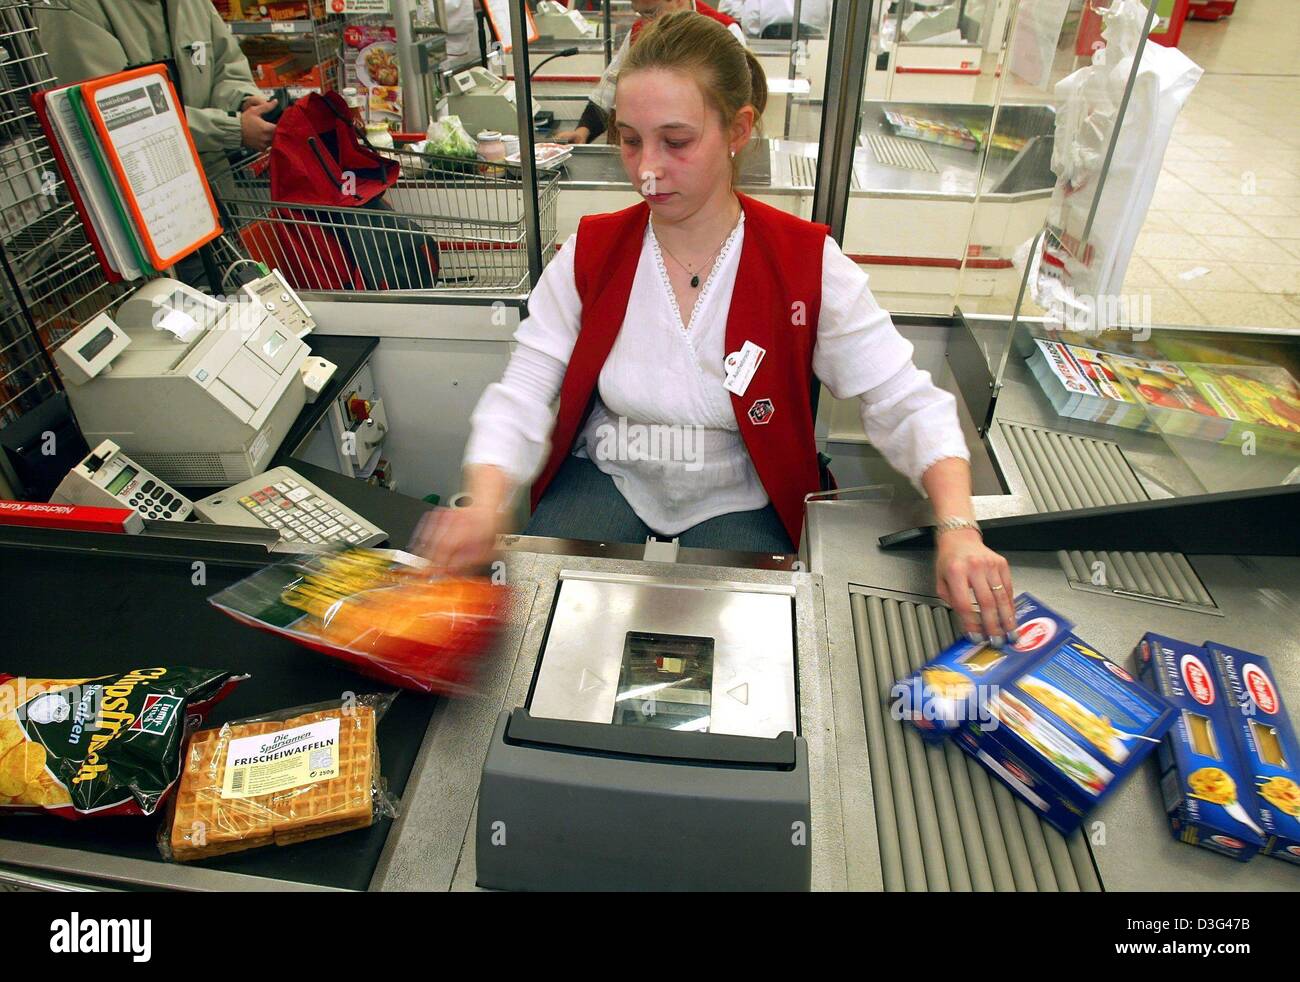 Dpa A Cashier Scans The Prices At A Cash Desk In An Intermarche